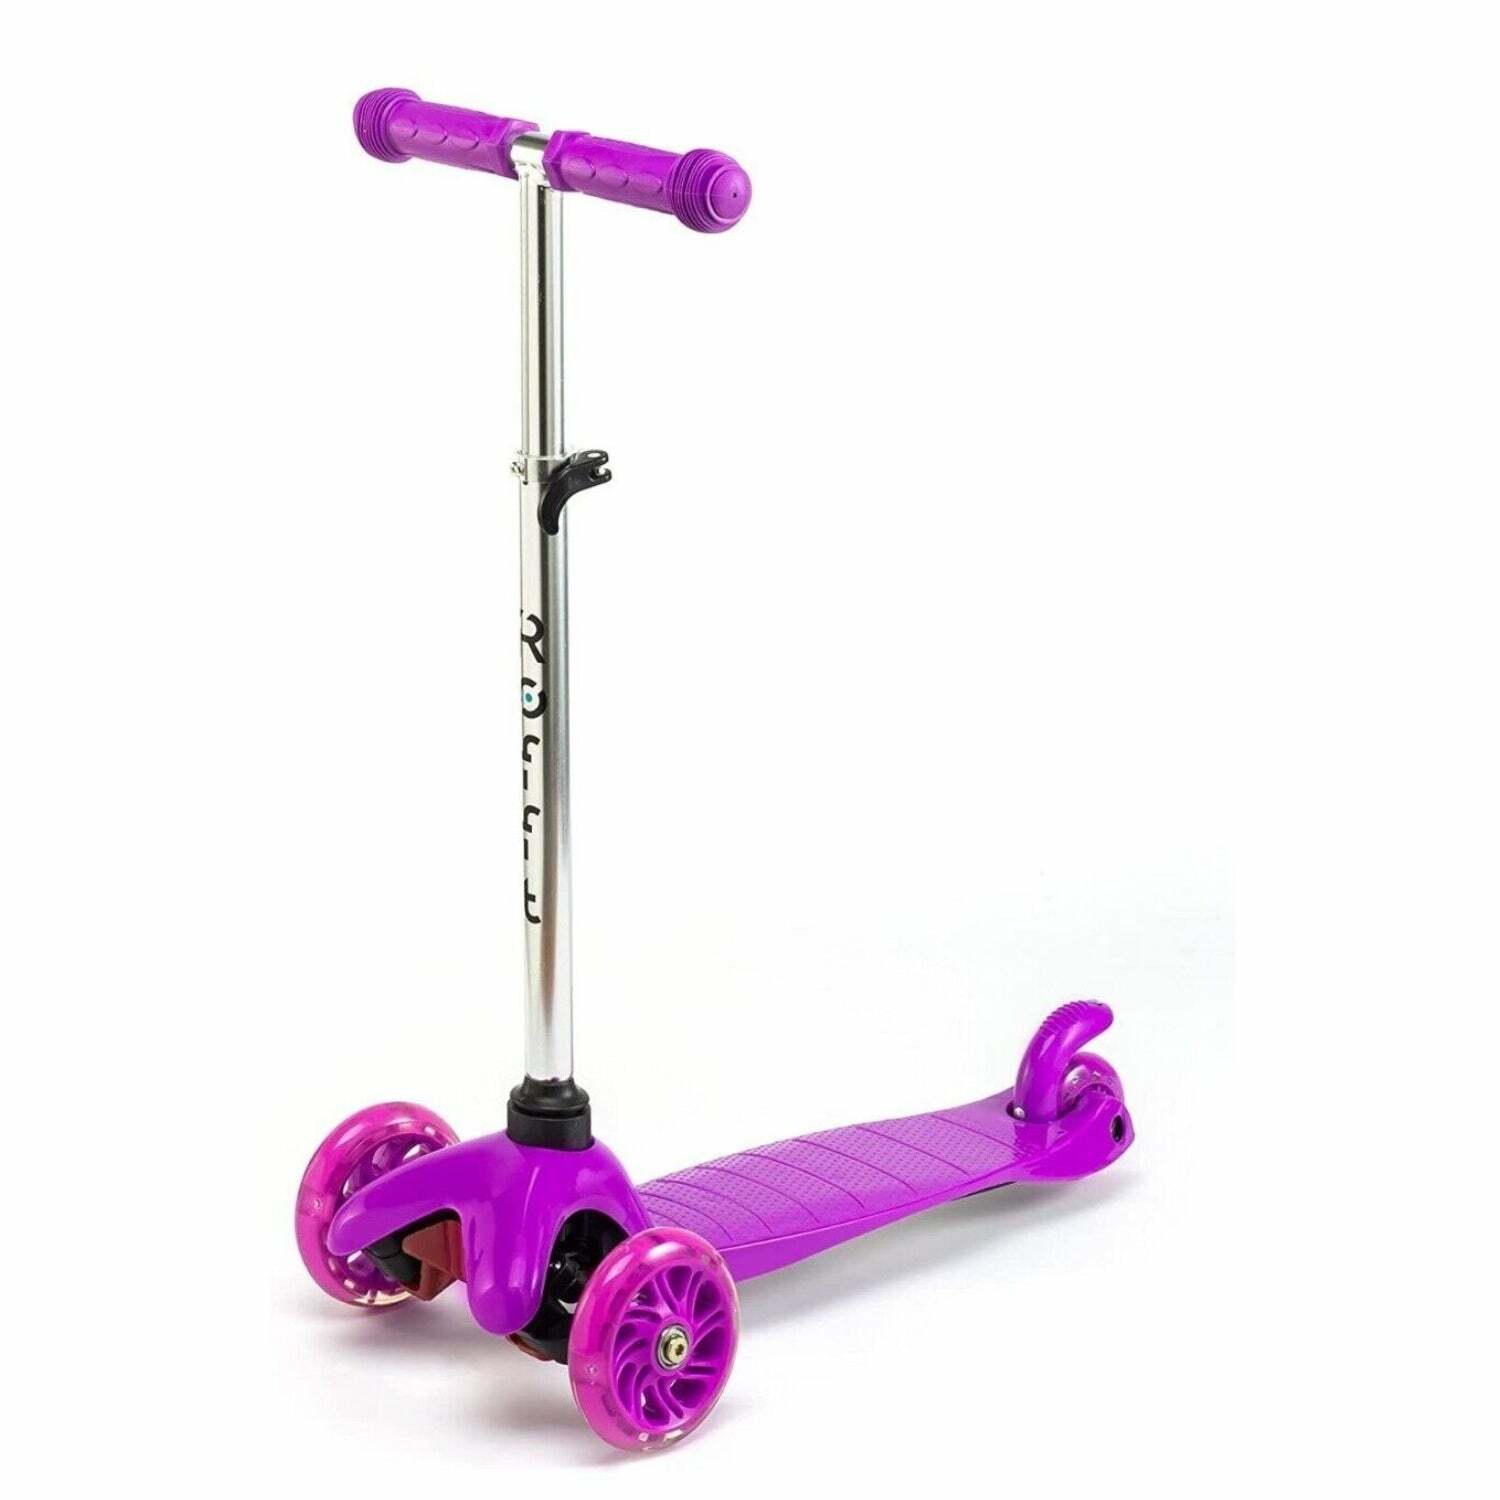 ROFFT - Kick Scooter, Lean-to-Steer LED 3 Wheel, Kids Ages 3-5 Purple